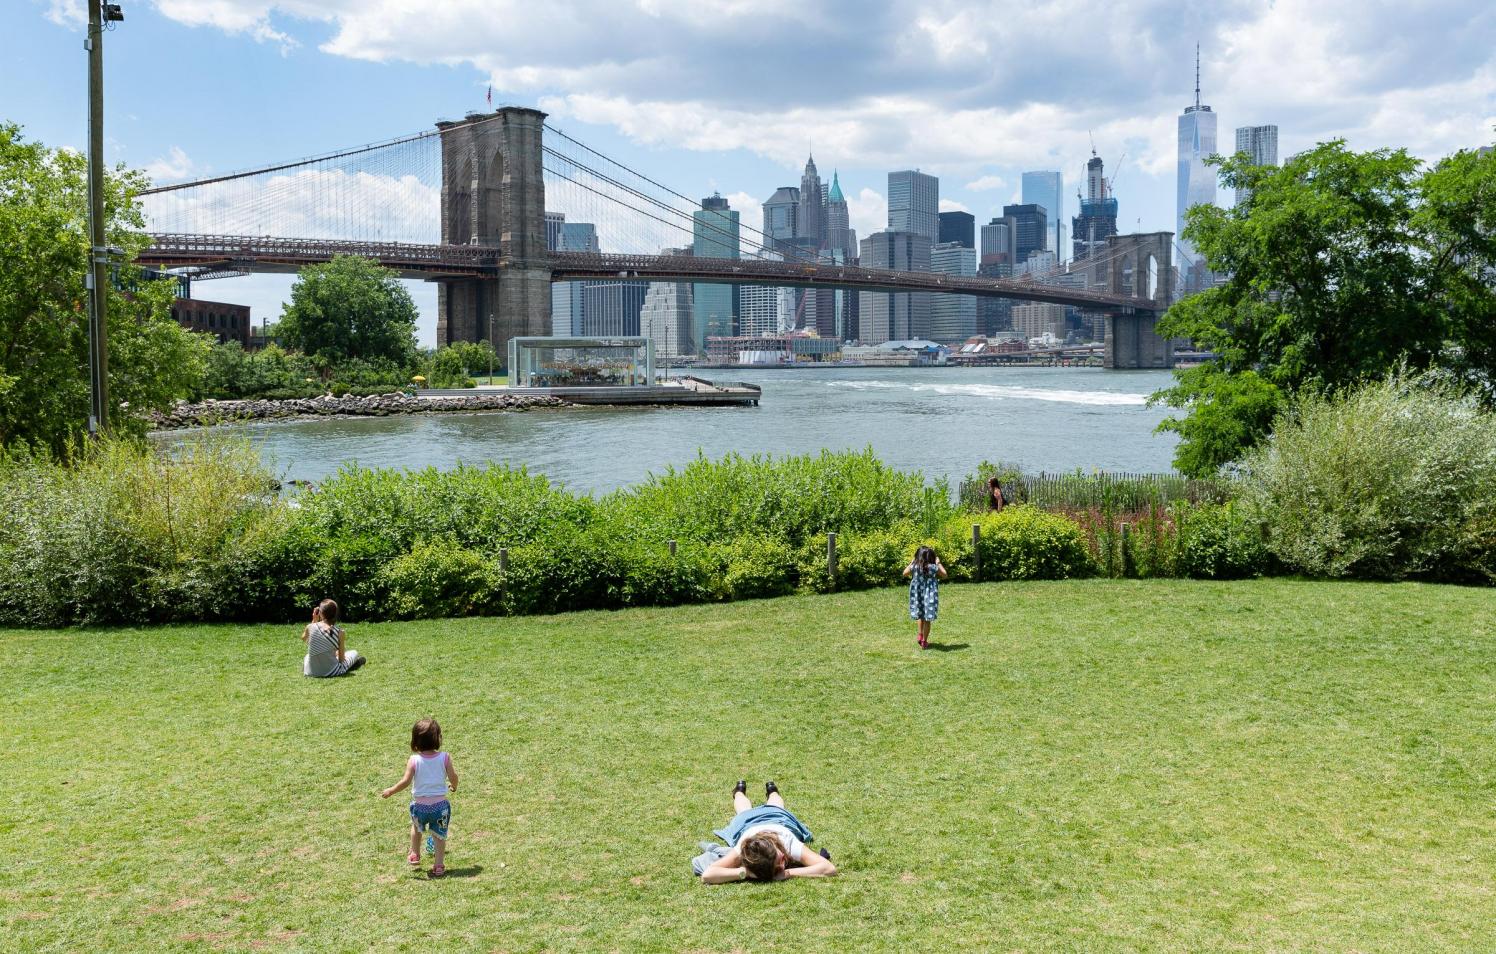 People lying on a lawn on a sunny day. The Brooklyn Bridge is seen in the background.